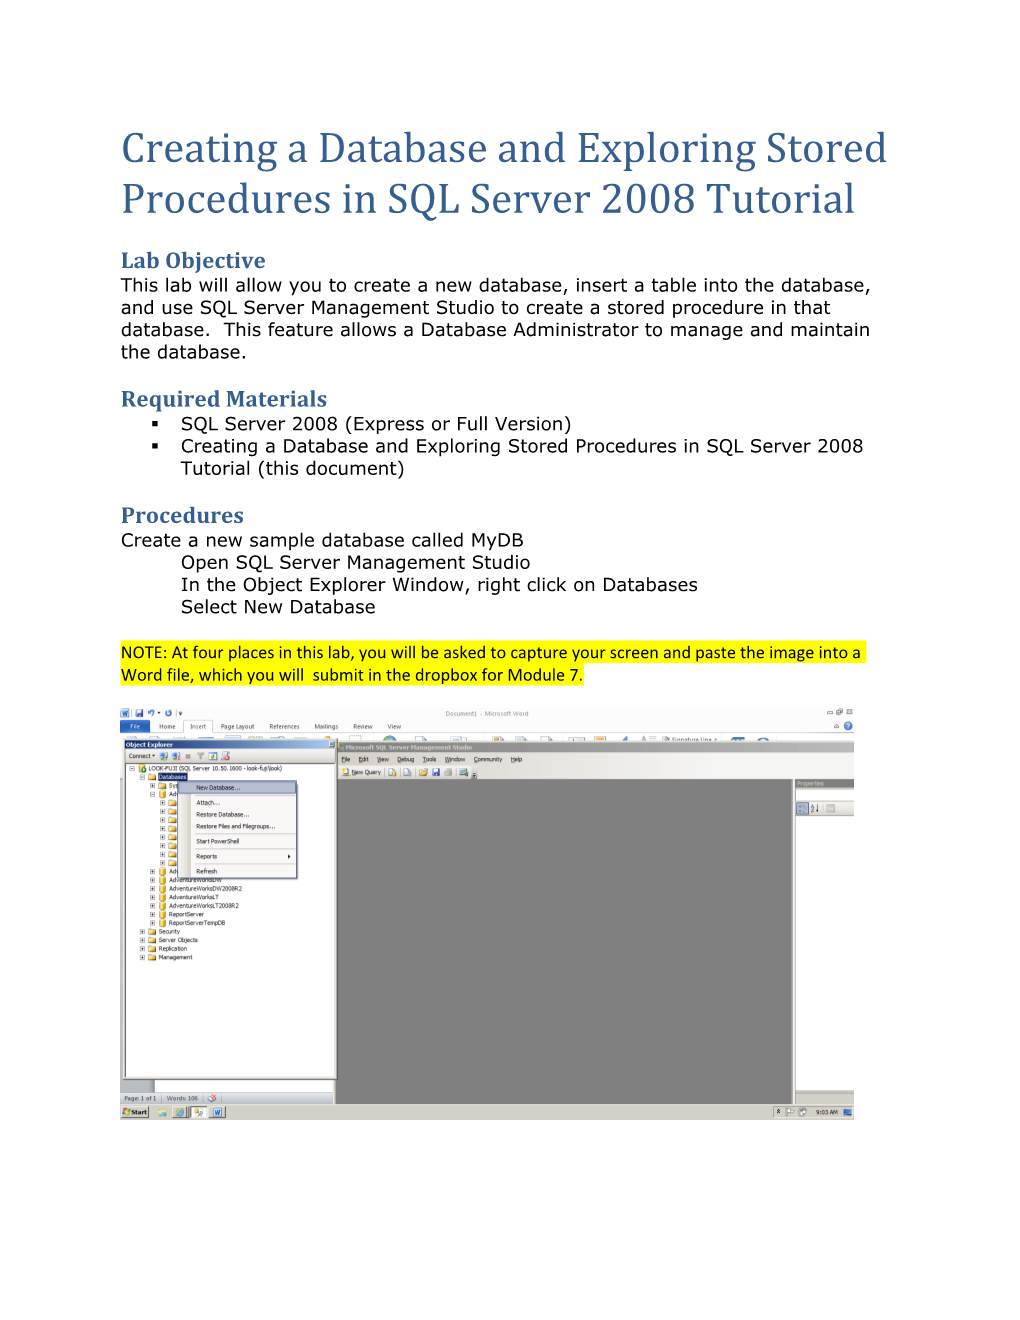 Creating a Database and Exploring Stored Procedures in SQL Server 2008 Tutorial